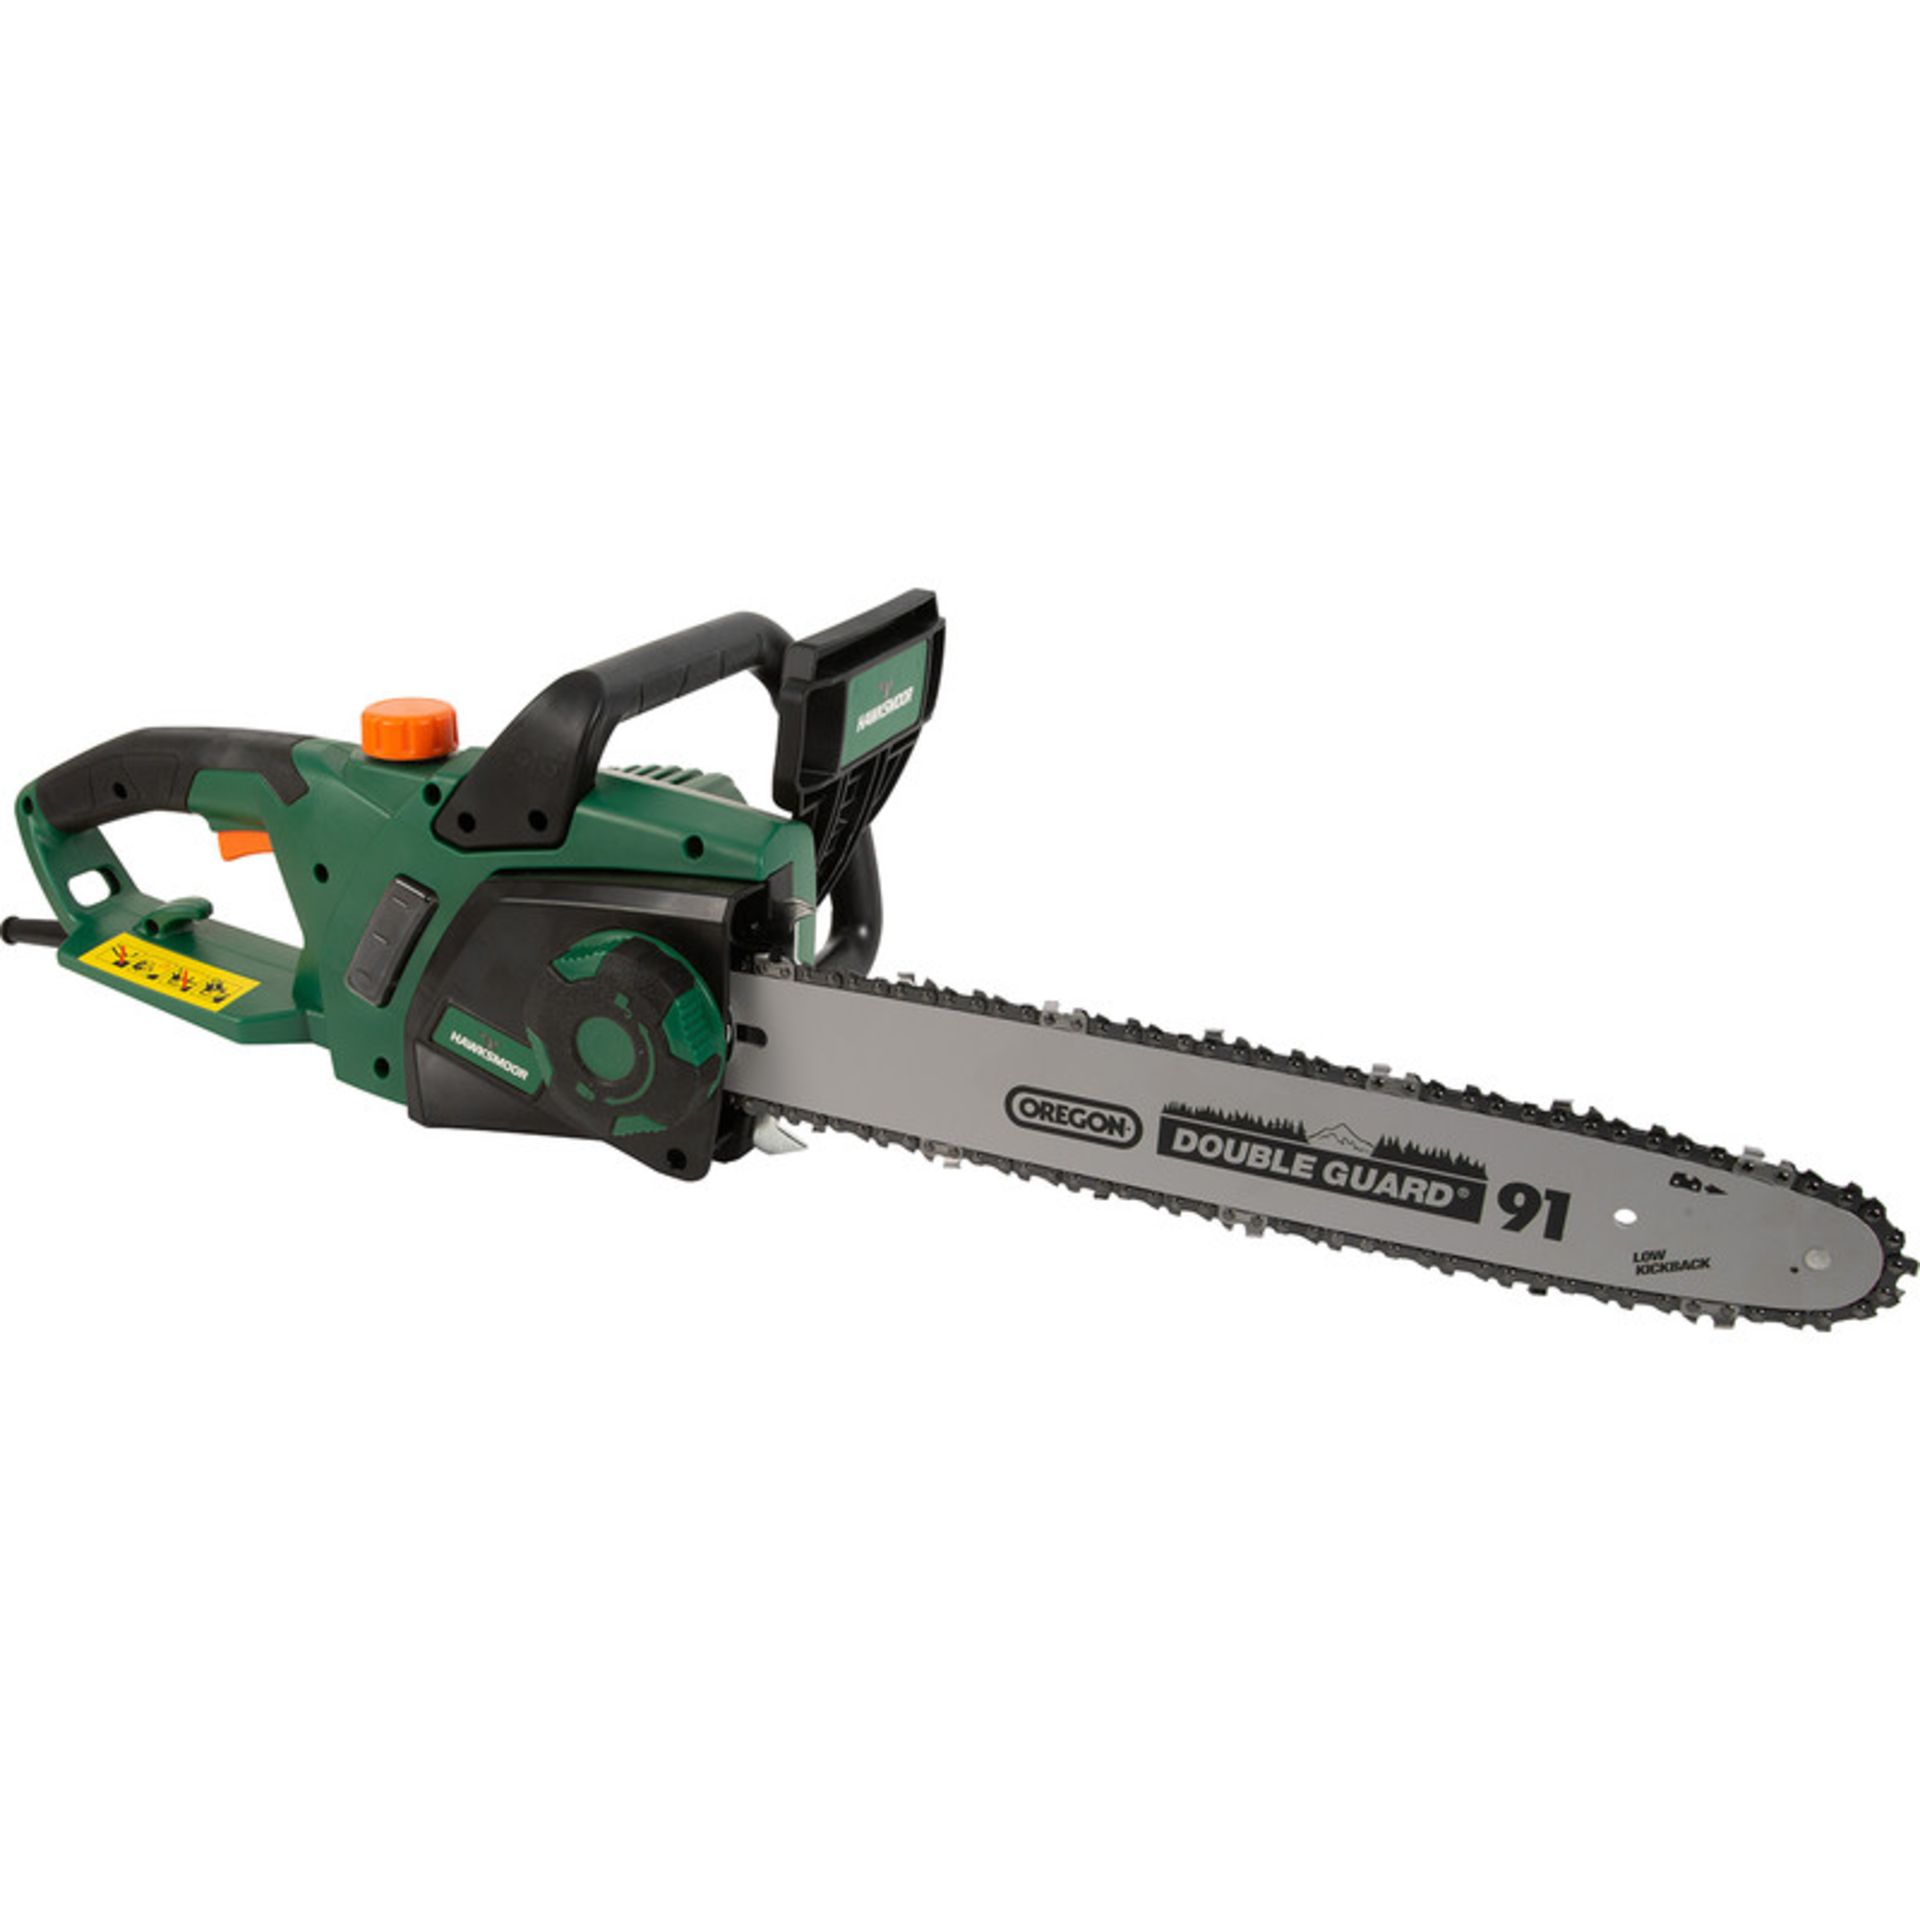 7 x Hawksmoor 2.2kW 40cm Electric Chainsaw 230V. - ER32. A compact corded chainsaw from Hawksmoor,